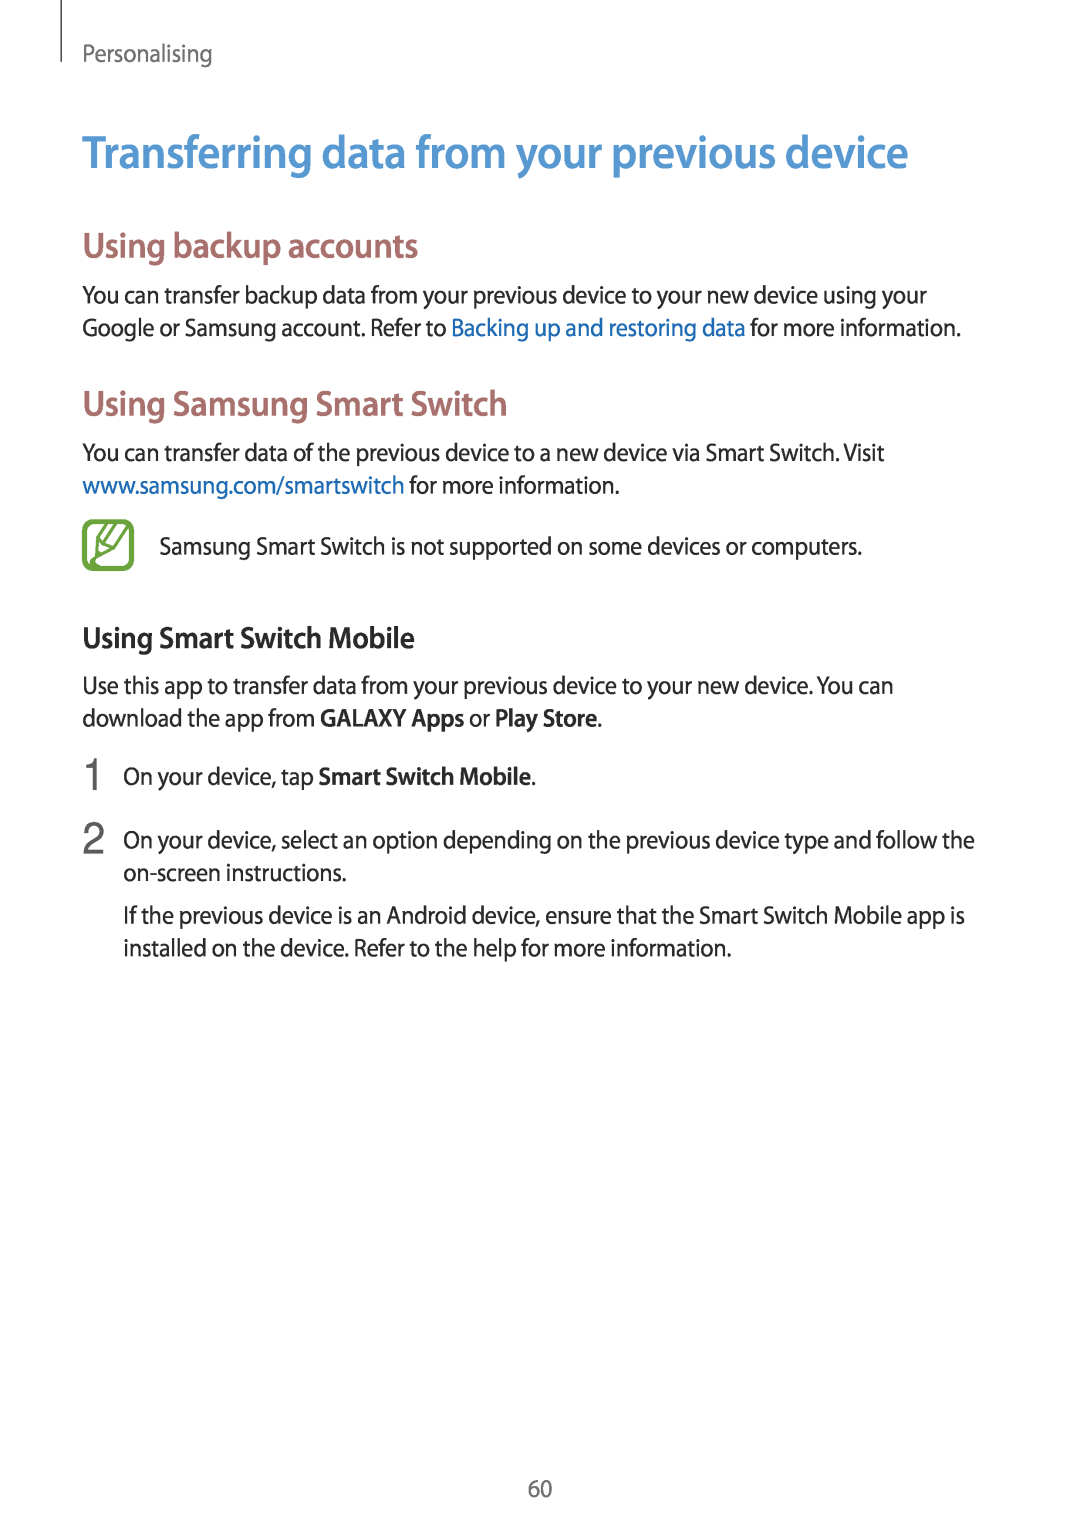 Samsung SM-A700FZWAITV Transferring data from your previous device, Using backup accounts, Using Samsung Smart Switch 